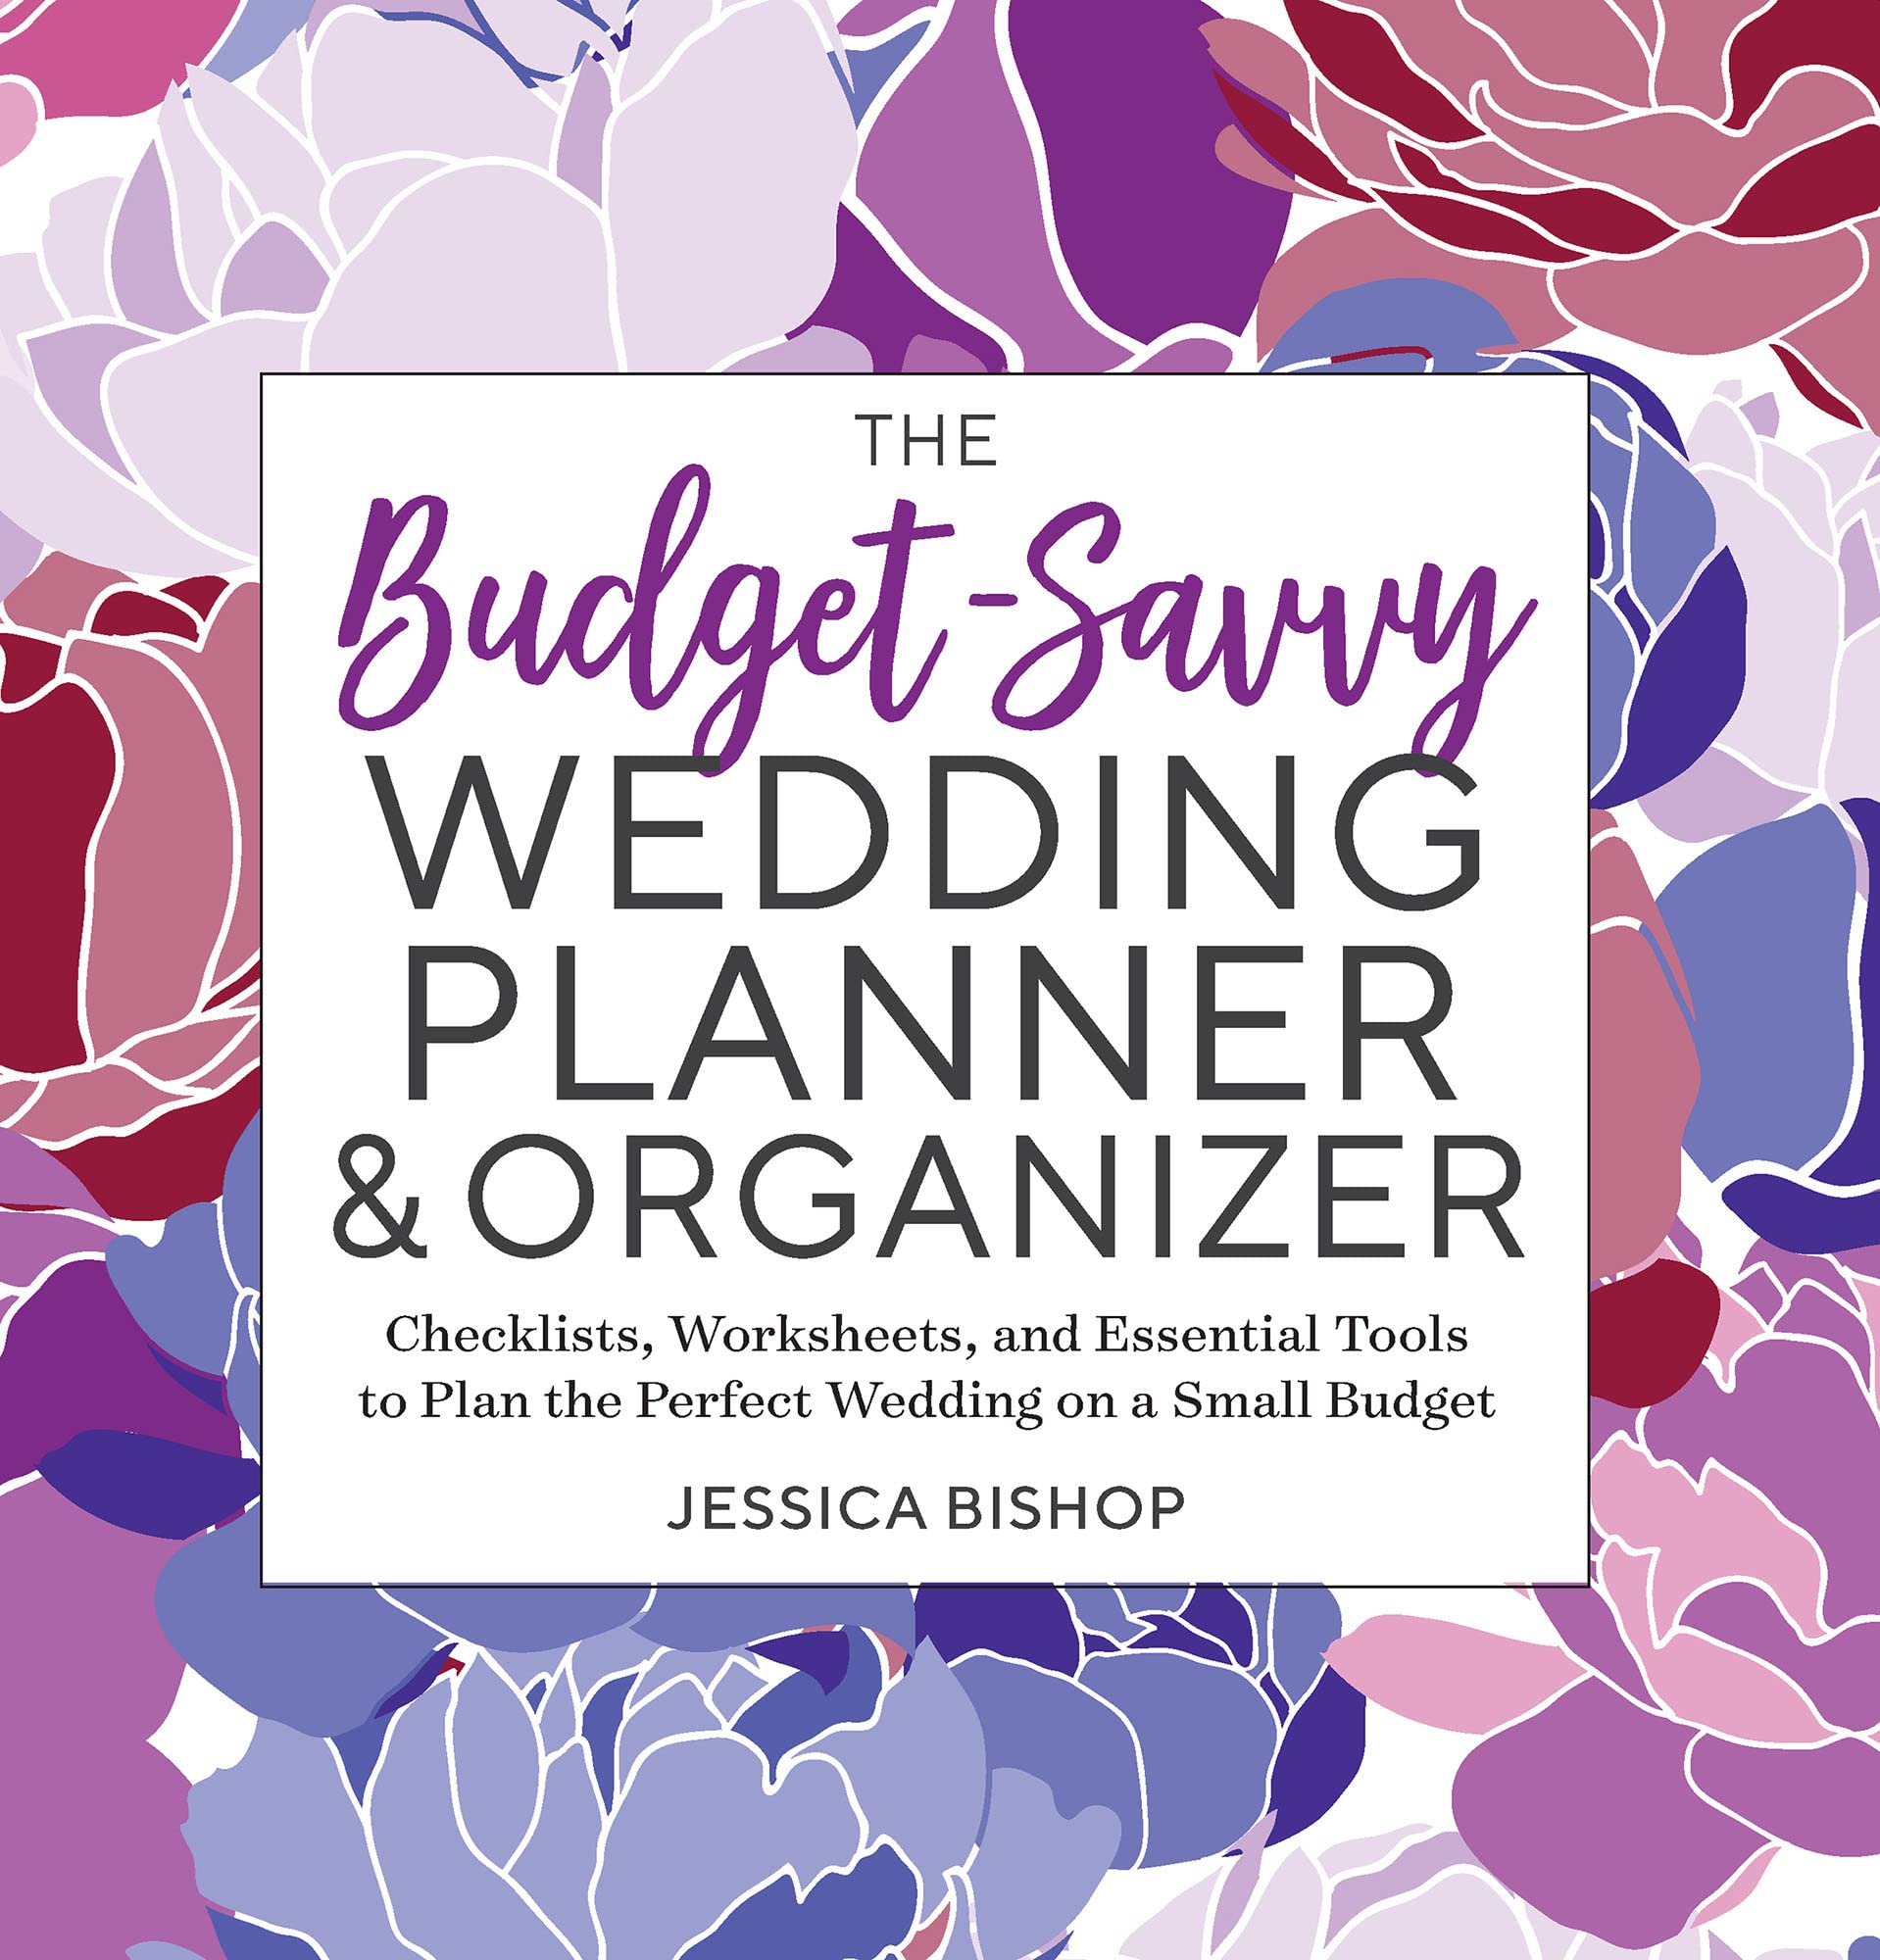 The Budget-Savvy Wedding Planner & Organizer: Checklists, Worksheets, and Essential Tools to Plan the Perfect Wedding on a Small Budget